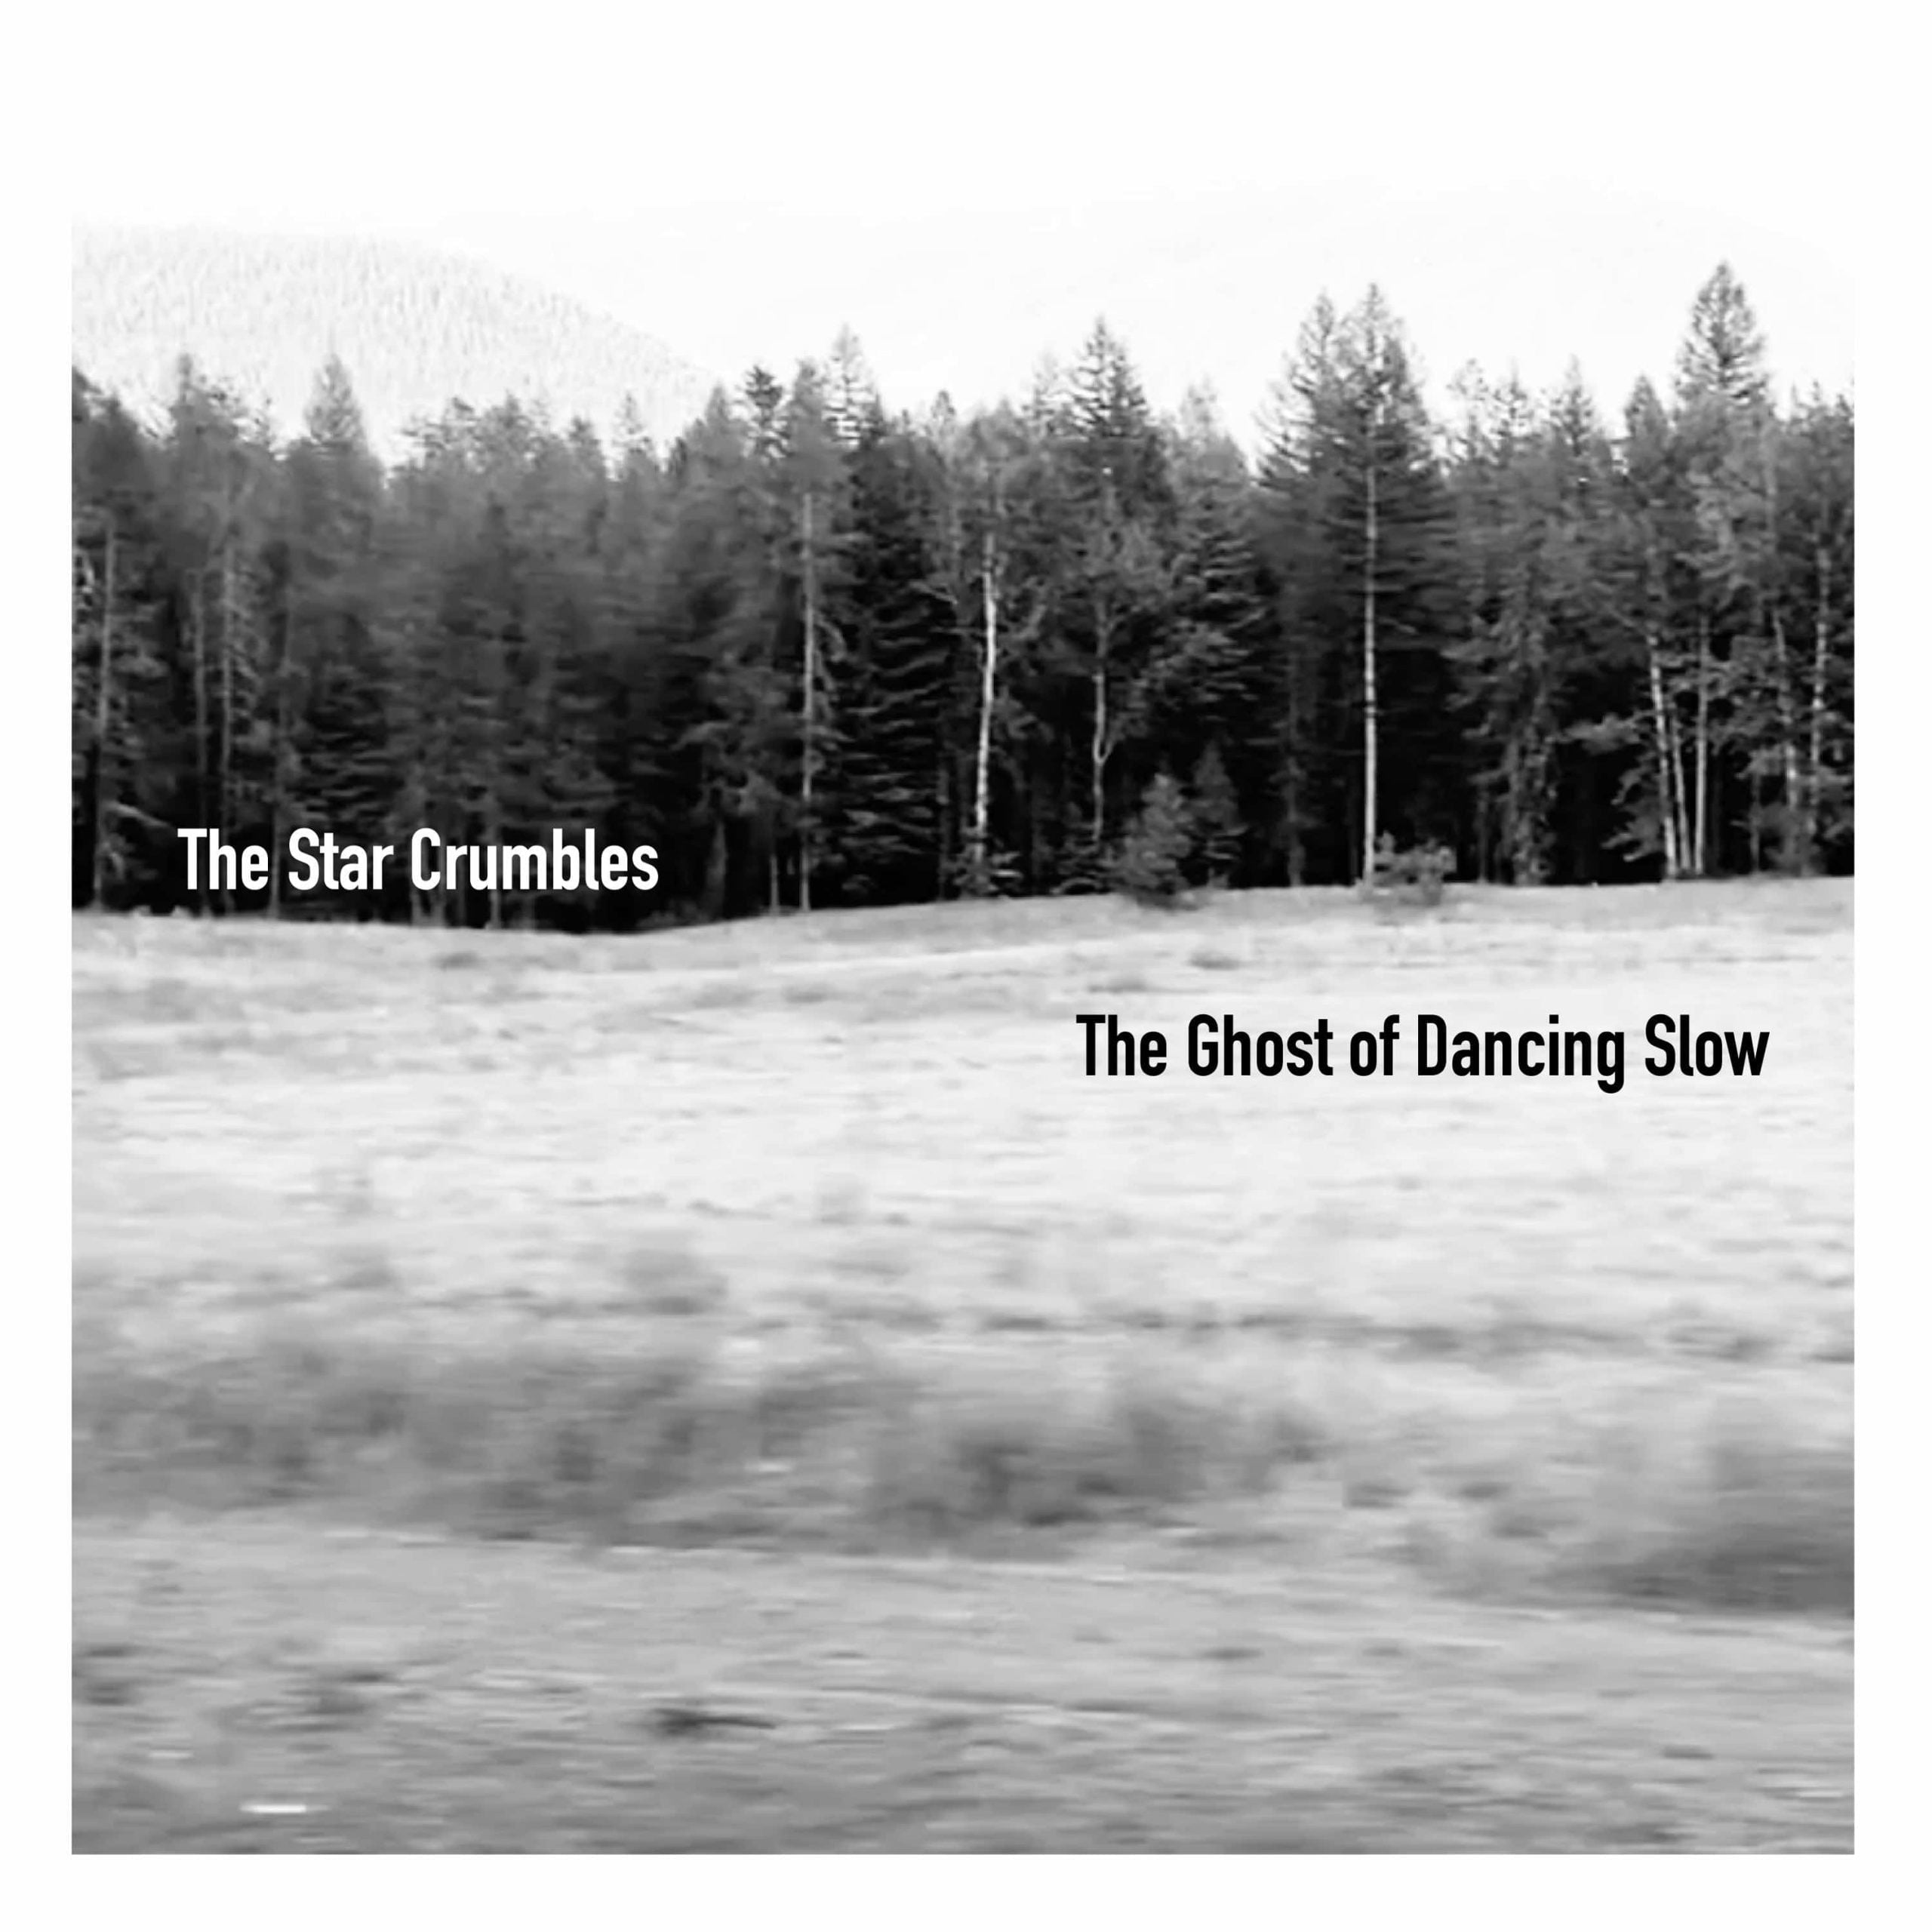 The Star Crumbles - The Ghost of Dancing Slow